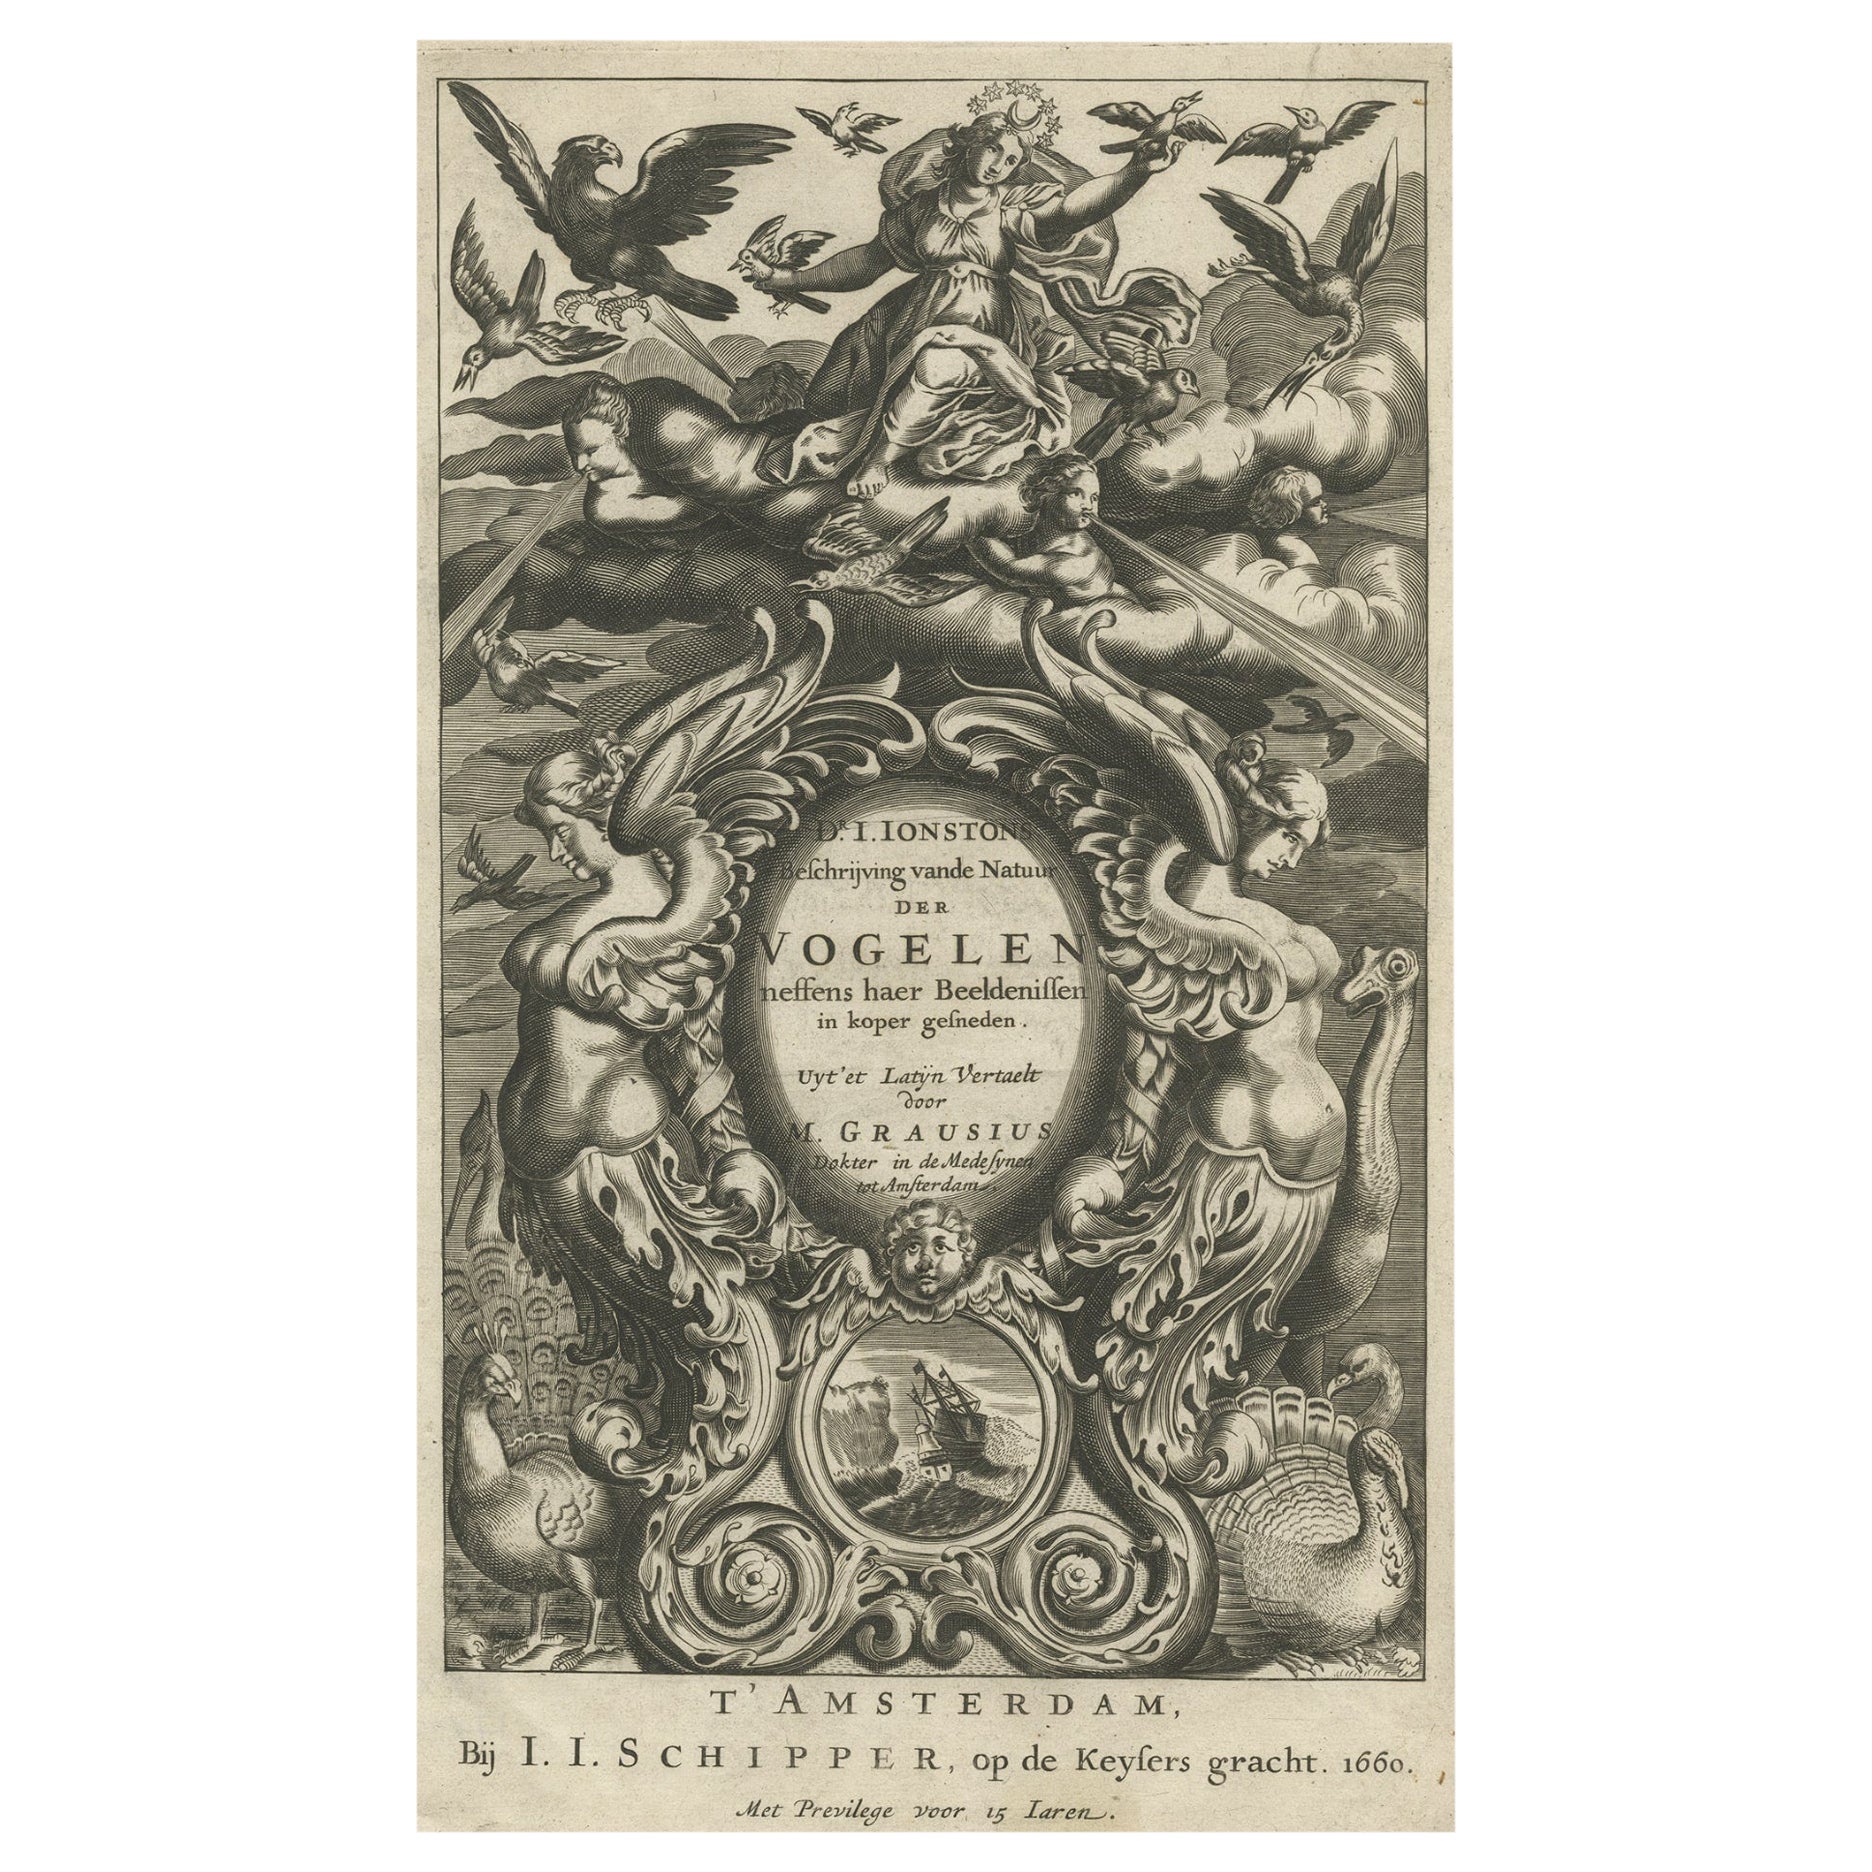 Antique Decorative Frontispiece of Putti and Birds, 1660